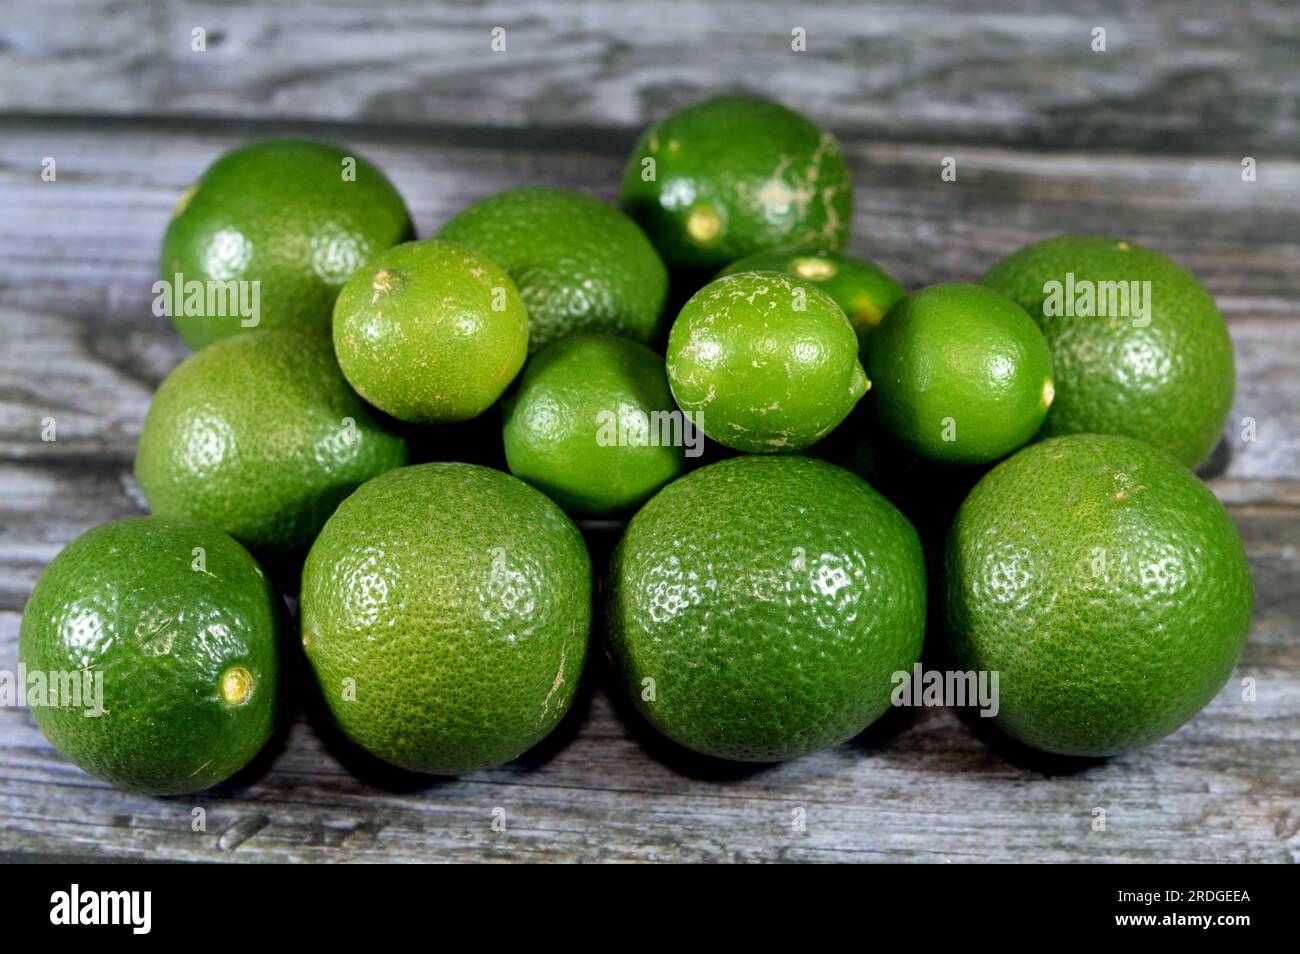 Pile of fresh green lemons, The lemon (Citrus limon) is a species of small evergreen trees in the flowering plant family Rutaceae, native to Asia, use Stock Photo